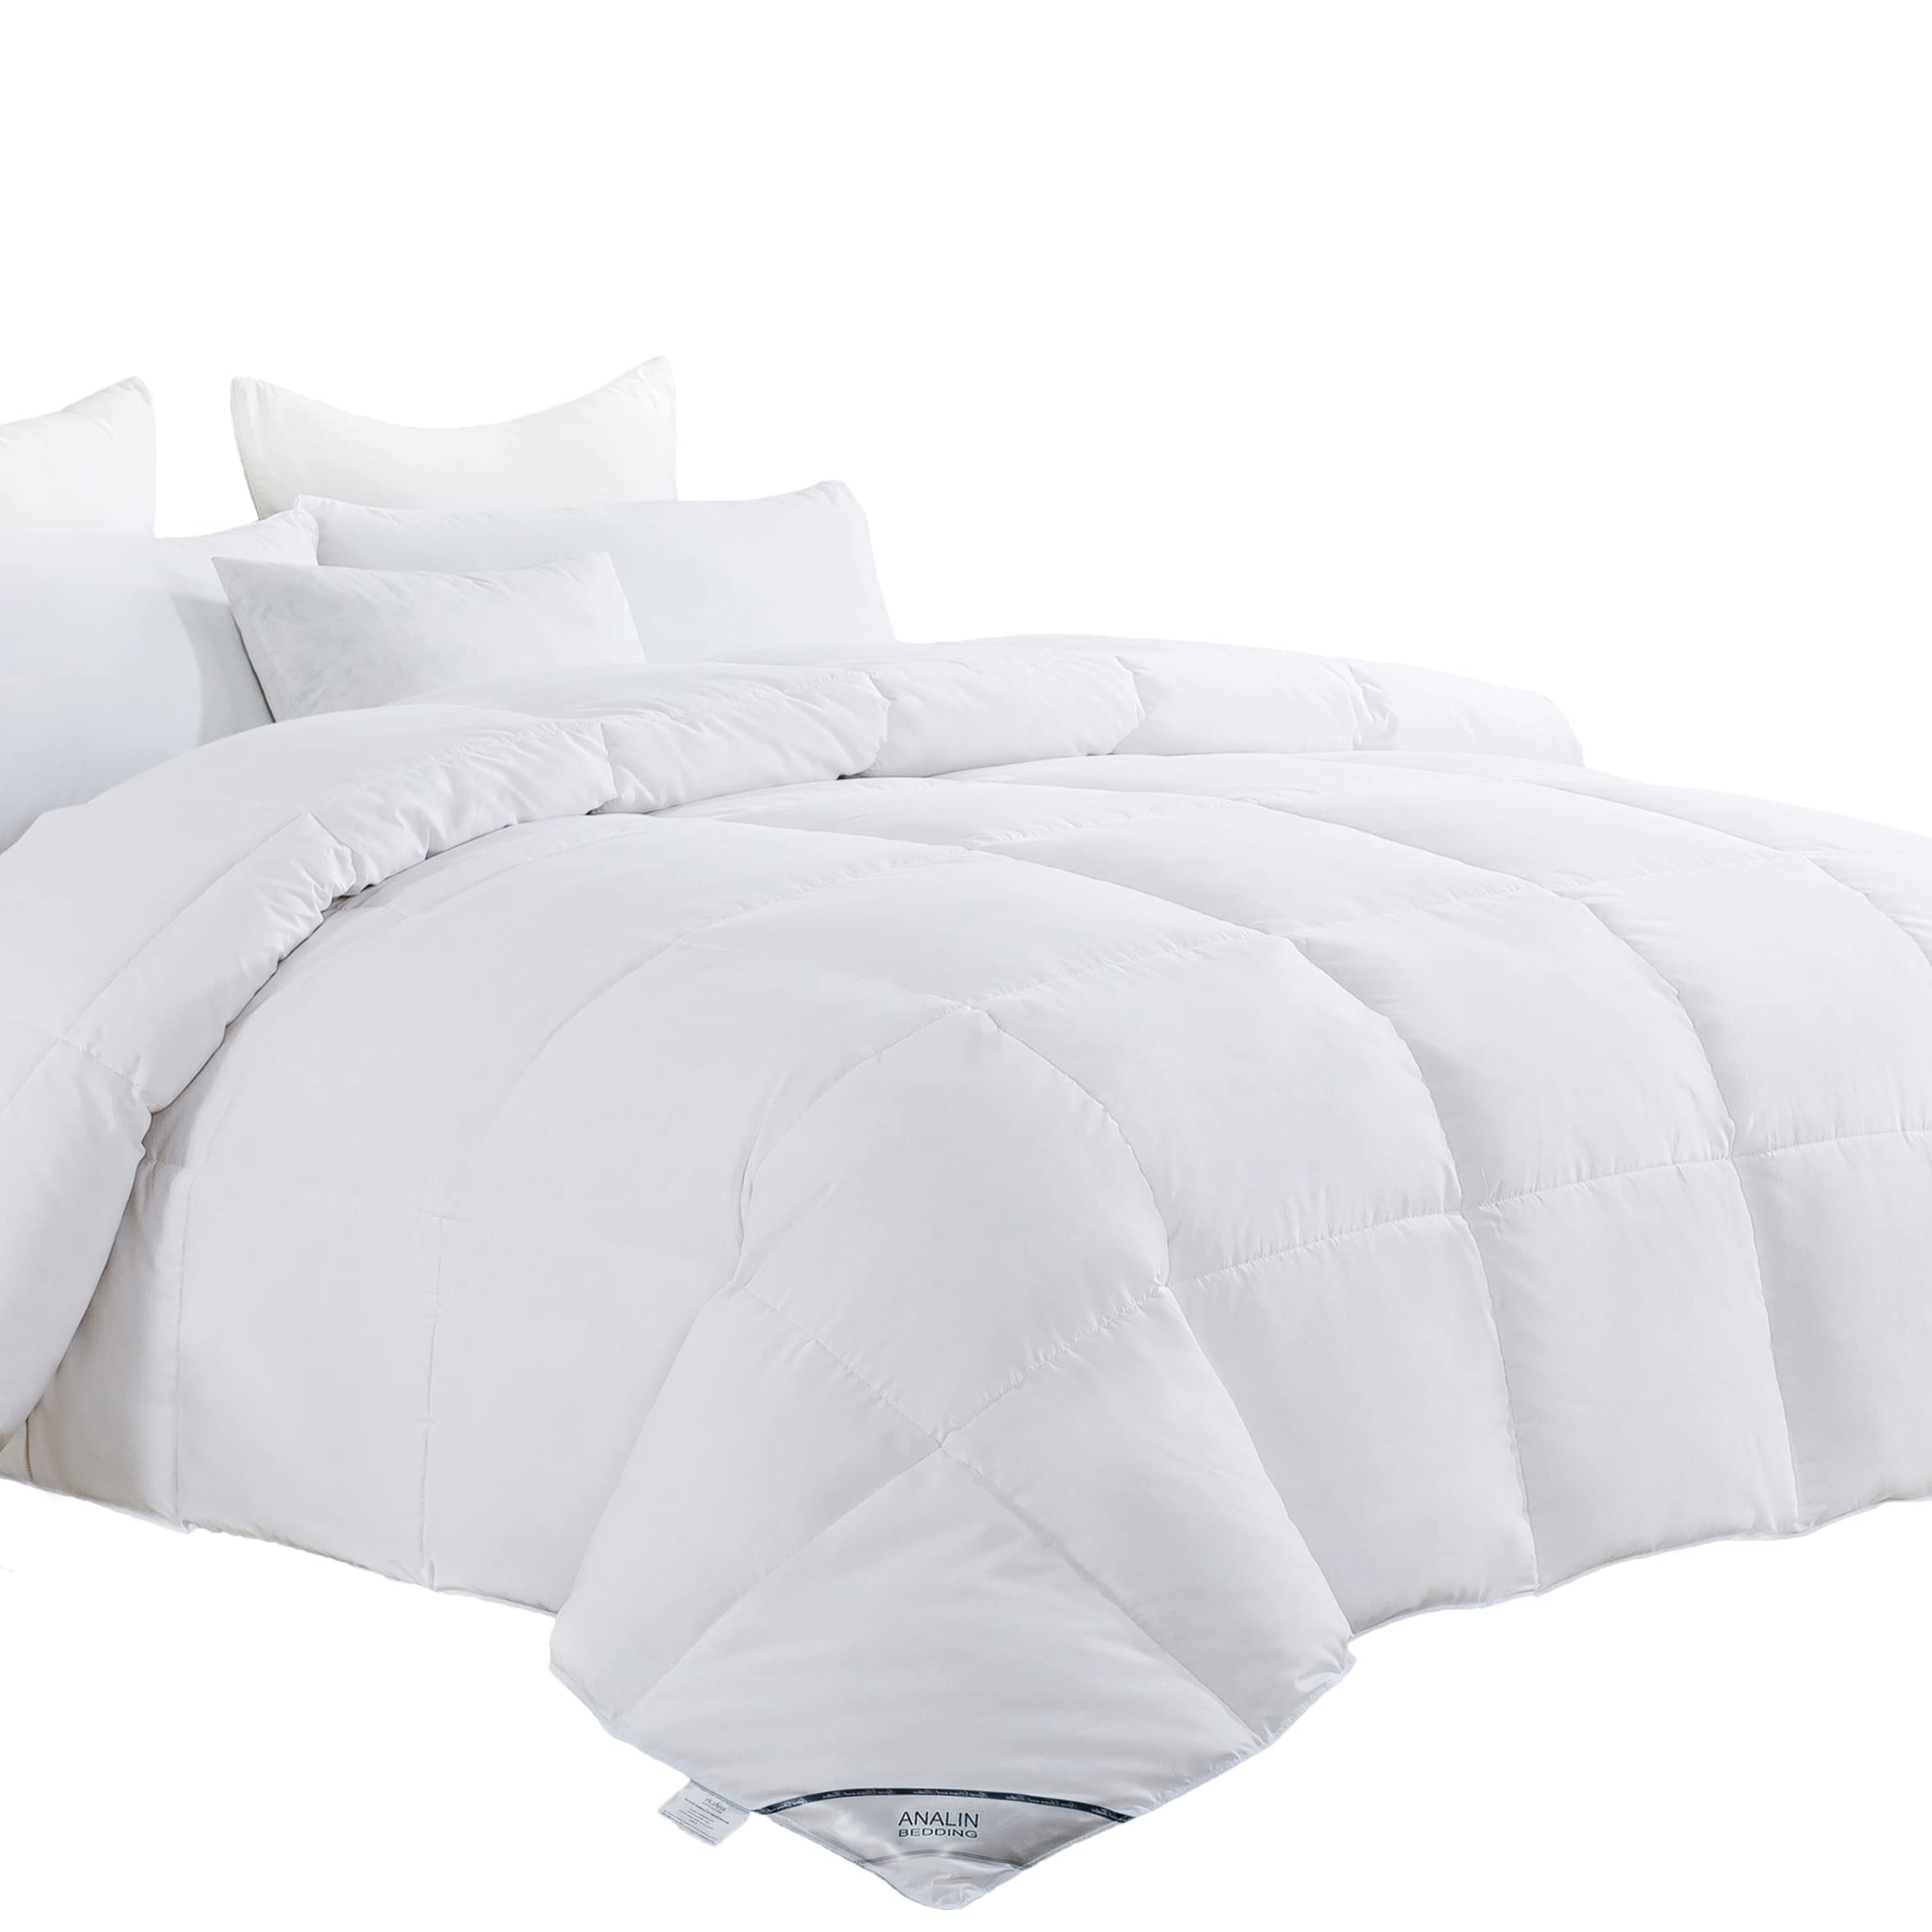 ANALIN King Size Duvet - 4.5 Tog Luxurious Goose Feather & Down Quilt, 60% Down King Size Bed Duvet, 230T Soft High Qulaity Fabric